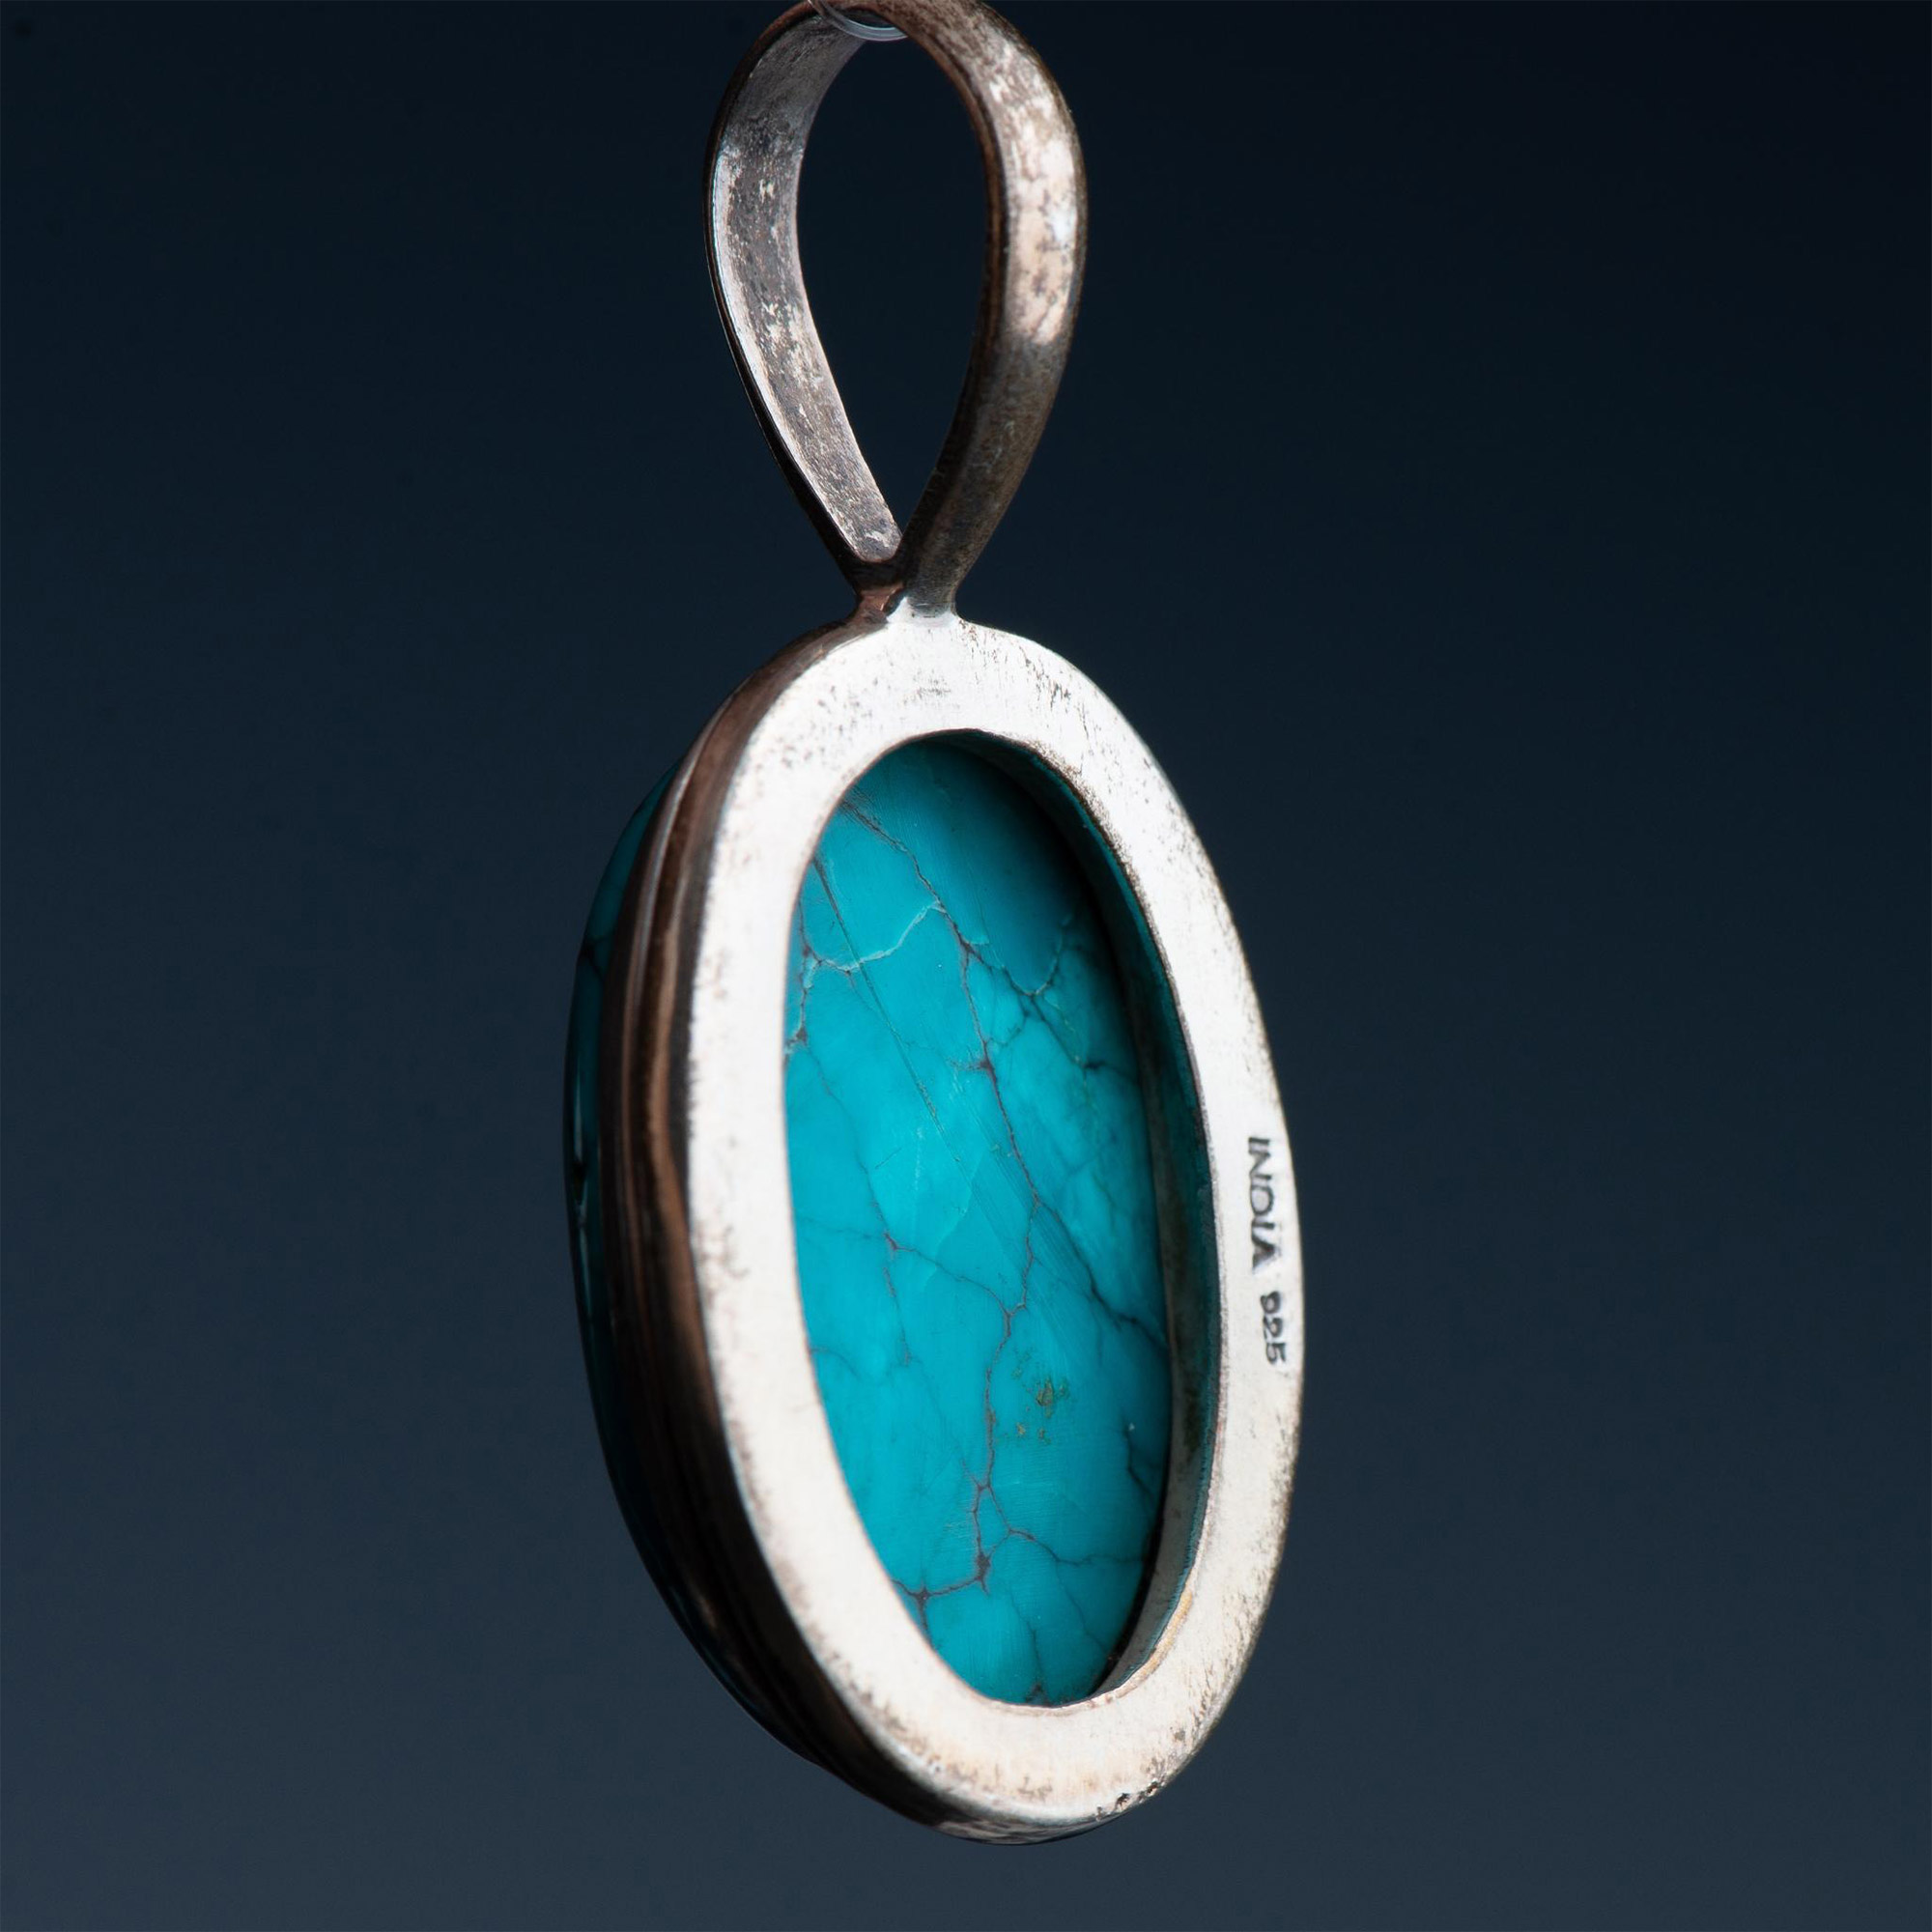 Large Oval Sterling Silver & Turquoise Pendant - Image 2 of 3